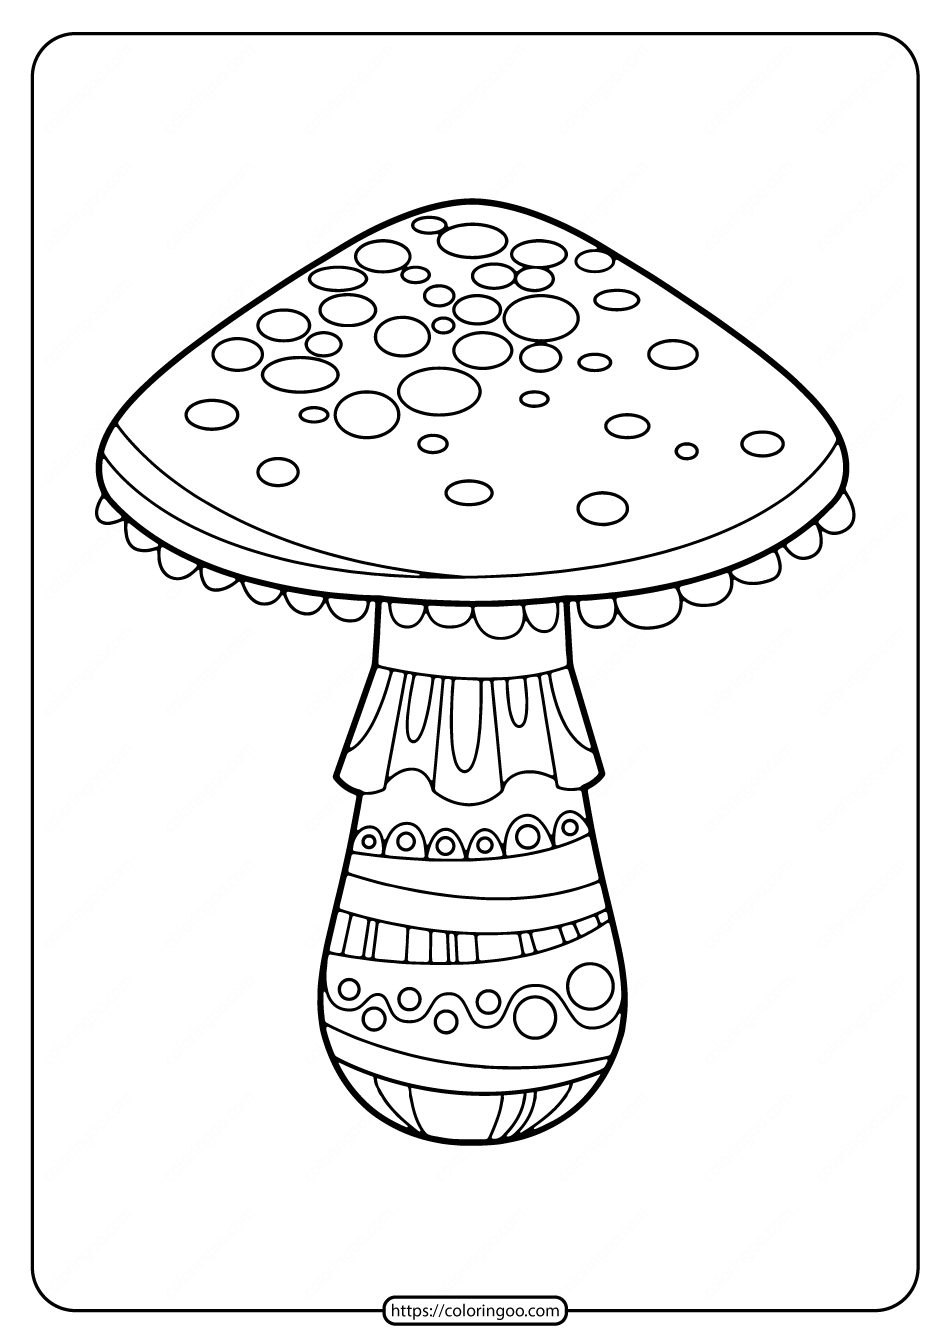 Printable Mushroom Coloring Pages for Kids